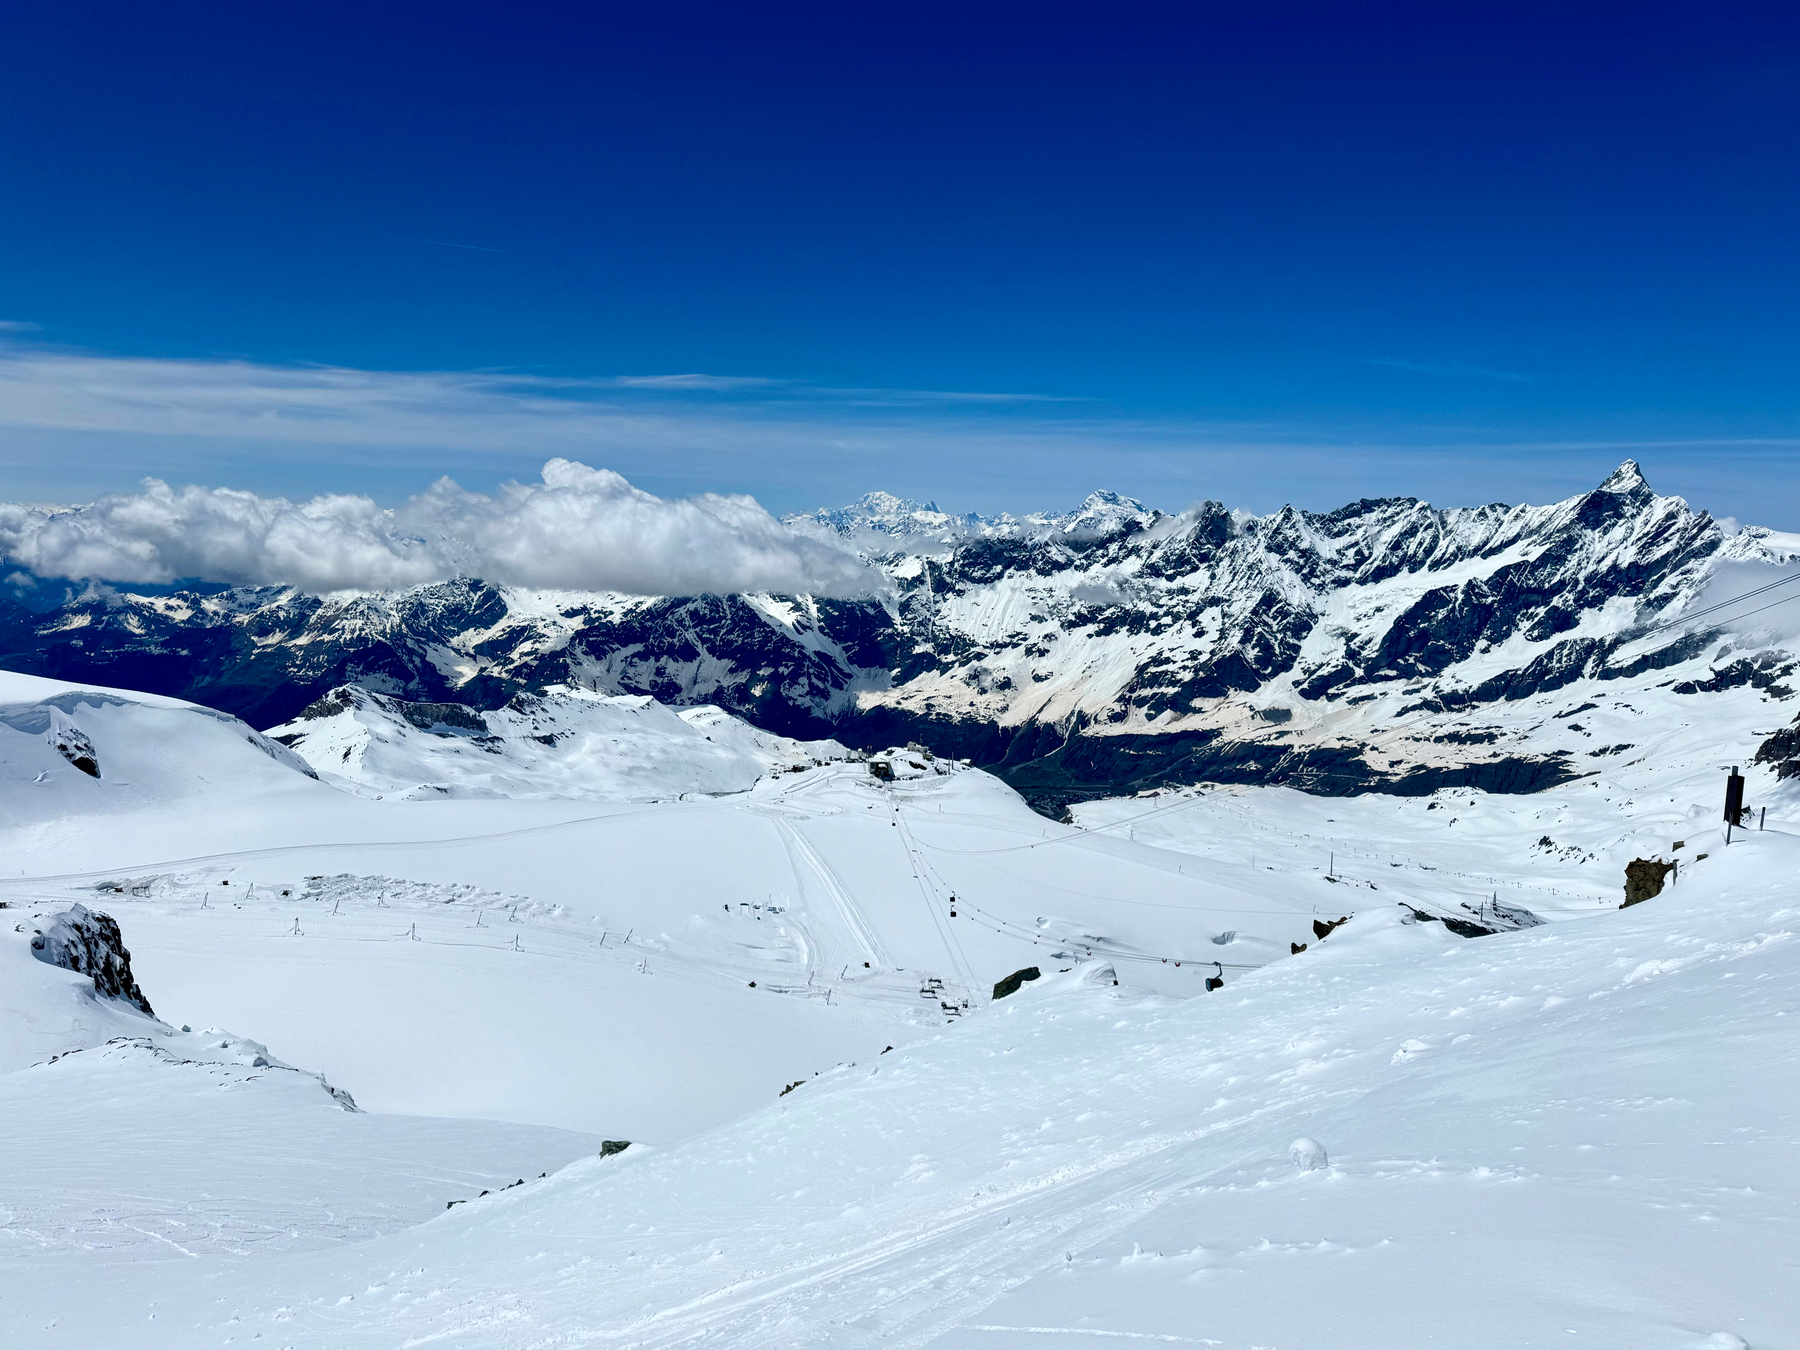 A panoramic view of a snow-covered mountain landscape with ski slopes and a clear blue sky.